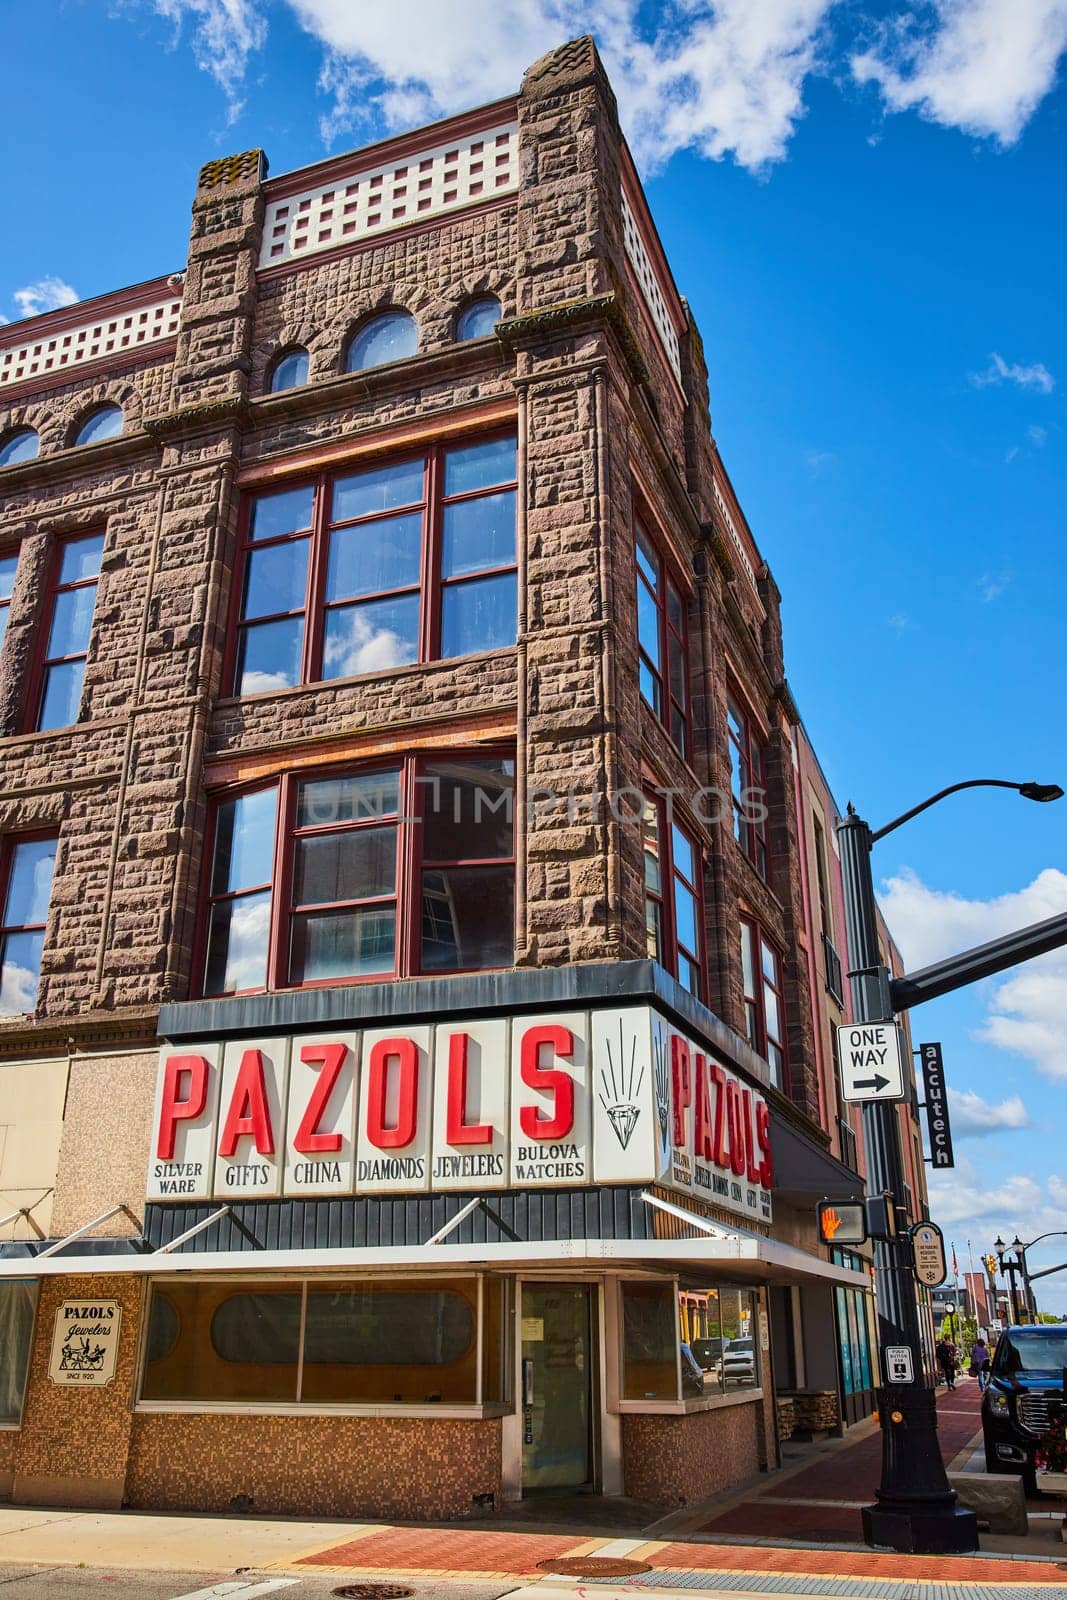 Vintage corner jewelry store Pazols in downtown Muncie, Indiana featuring brownstone architecture and large windows under a clear daytime sky.